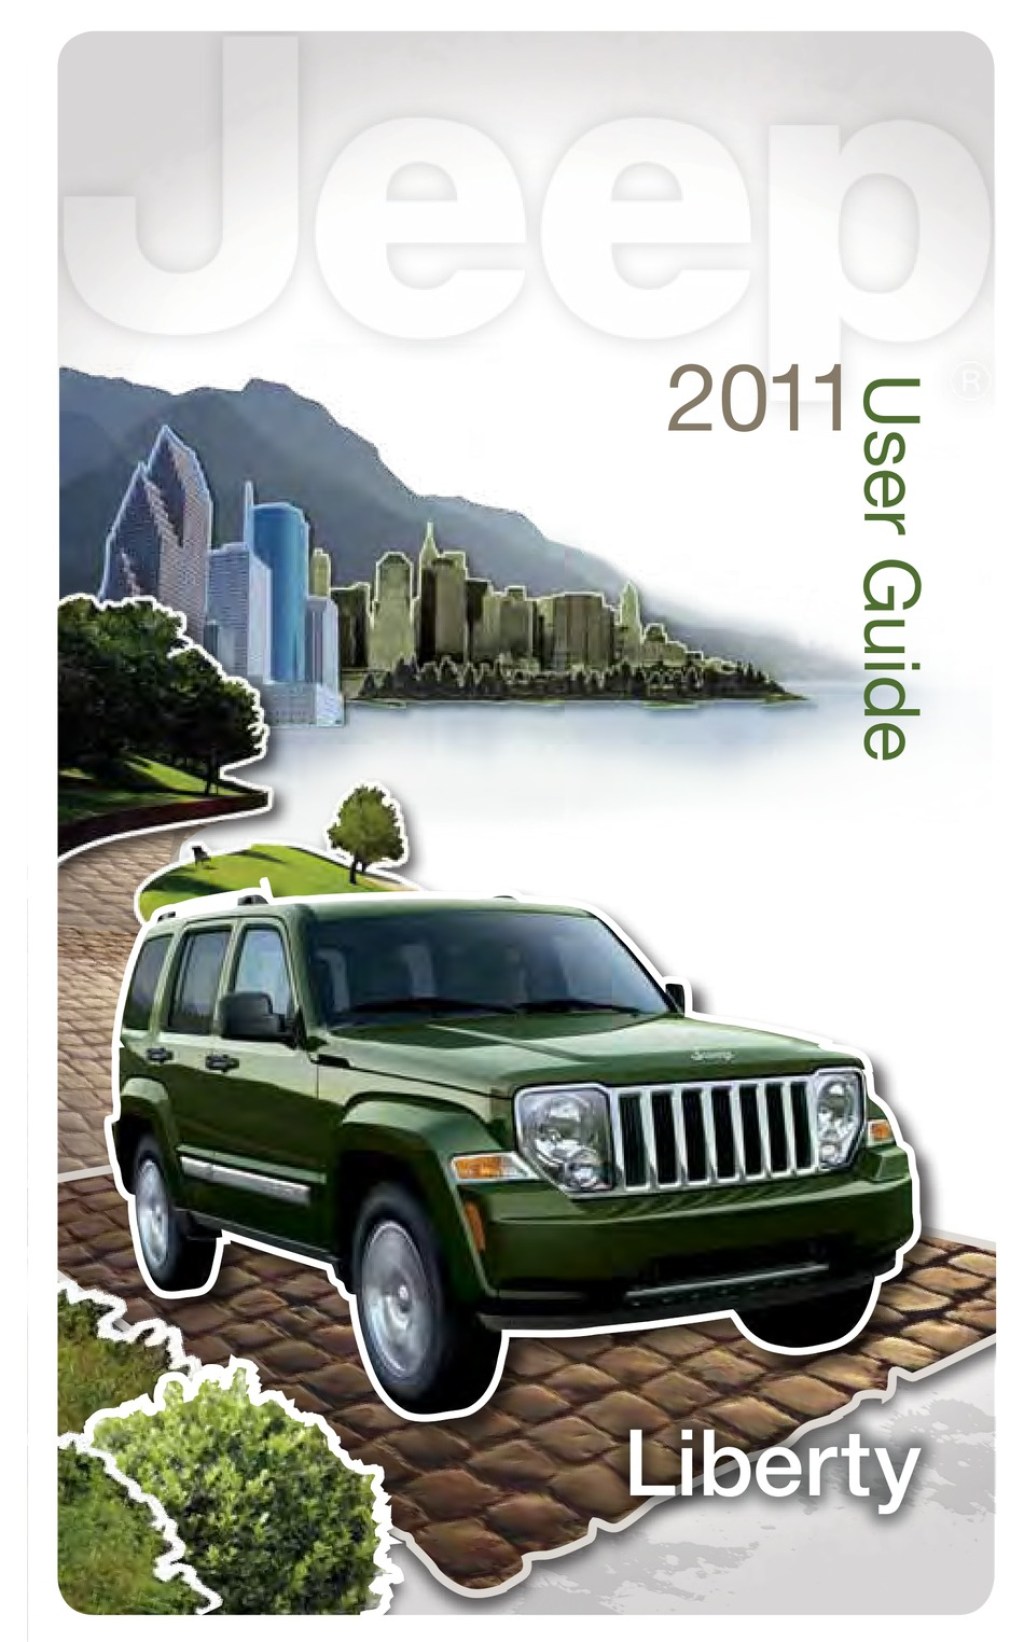 Picture of: JEEP LIBERTY USER MANUAL Pdf Download  ManualsLib